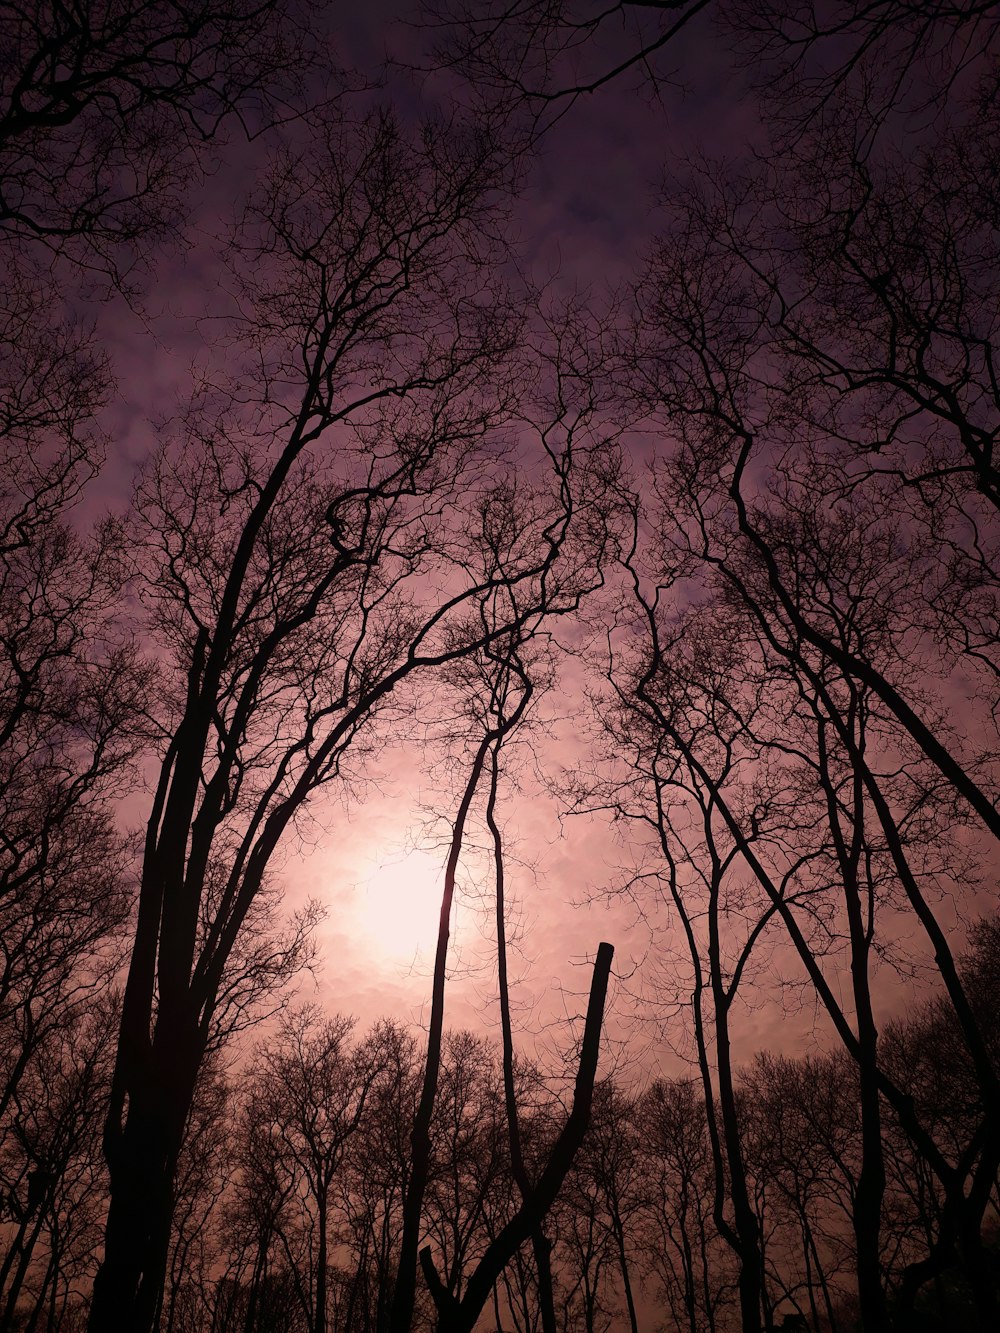 beige sky over leafless trees at sunset